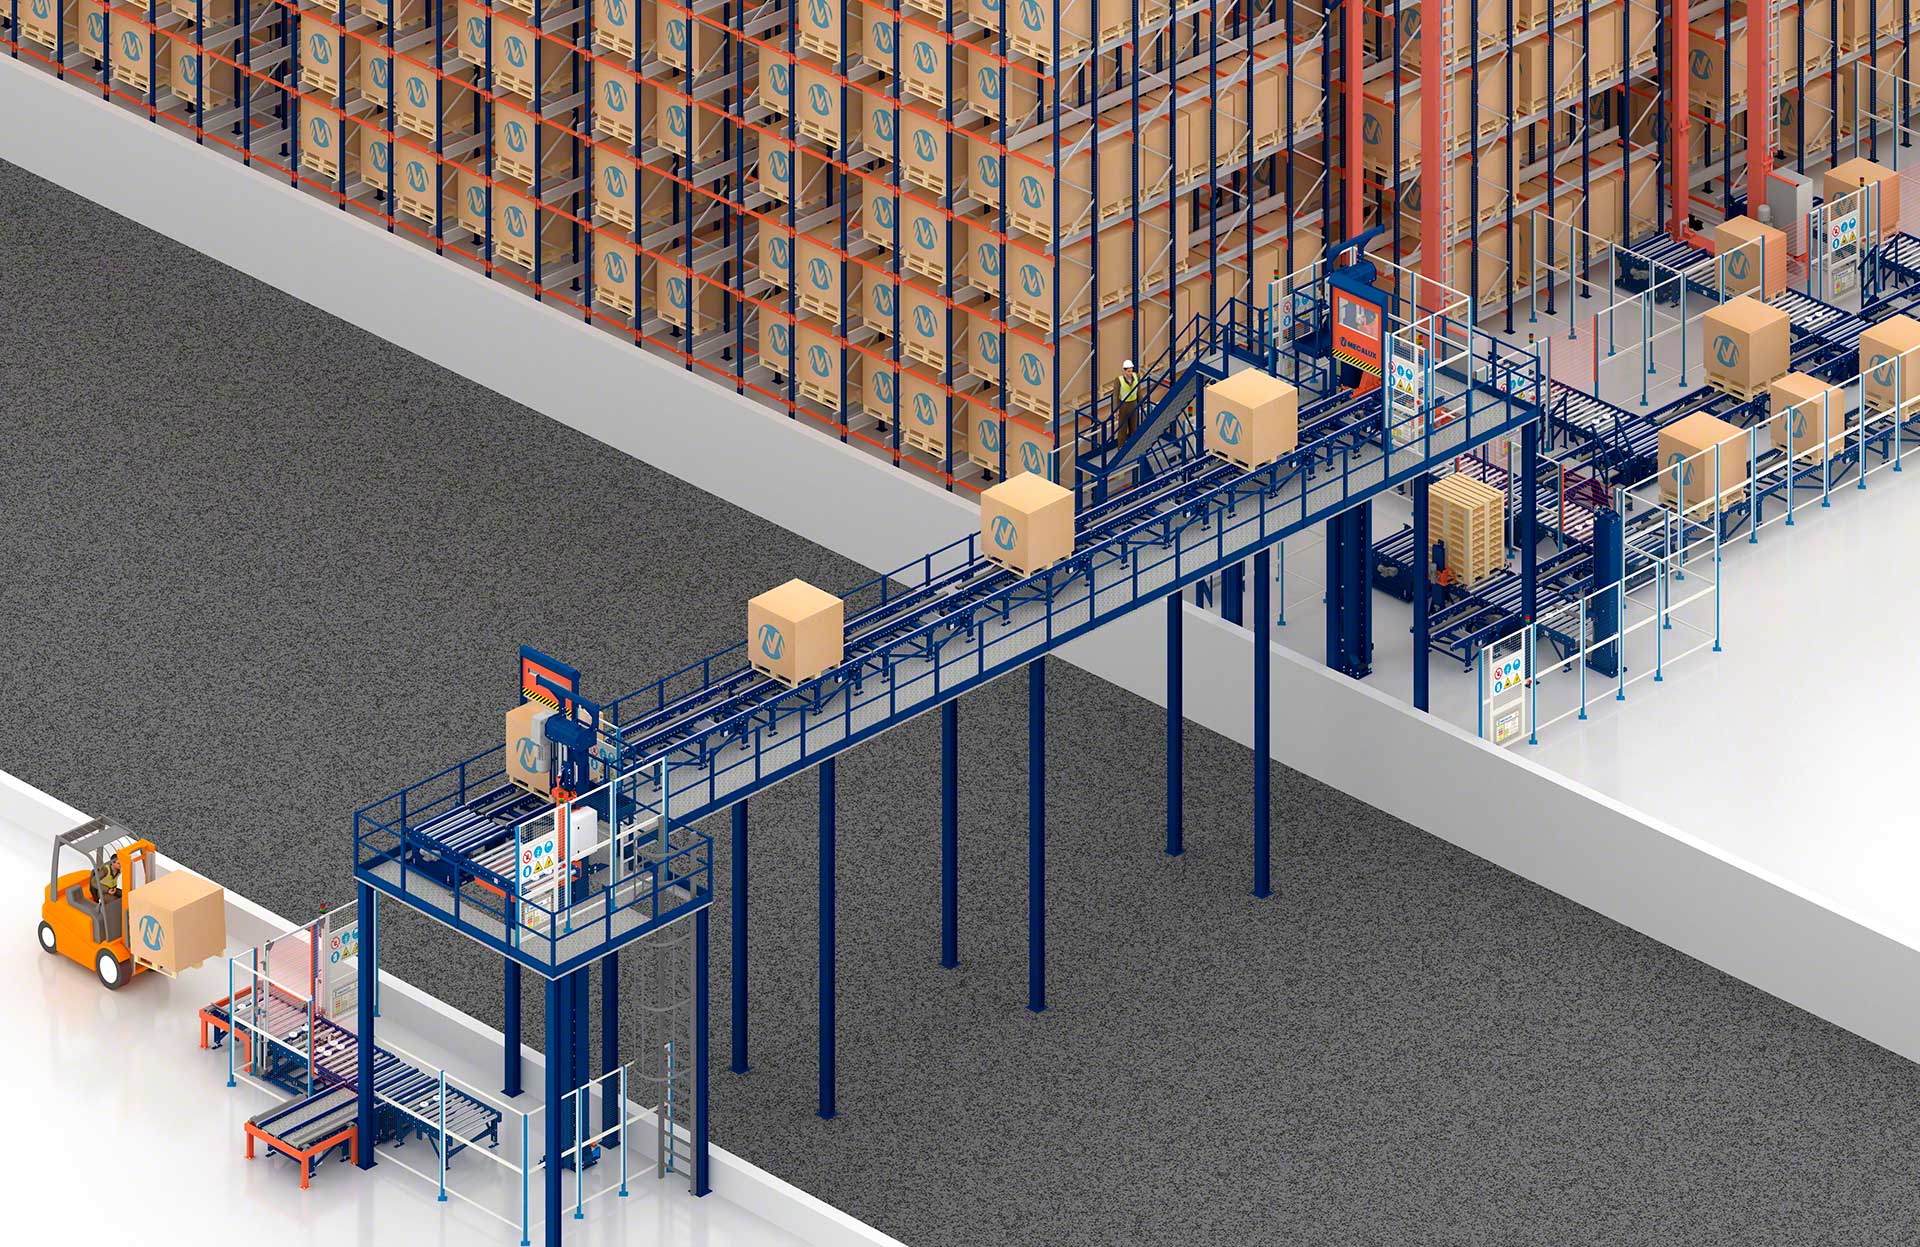 Vertical conveyors can also be used to connect separate warehouses through raised tunnels